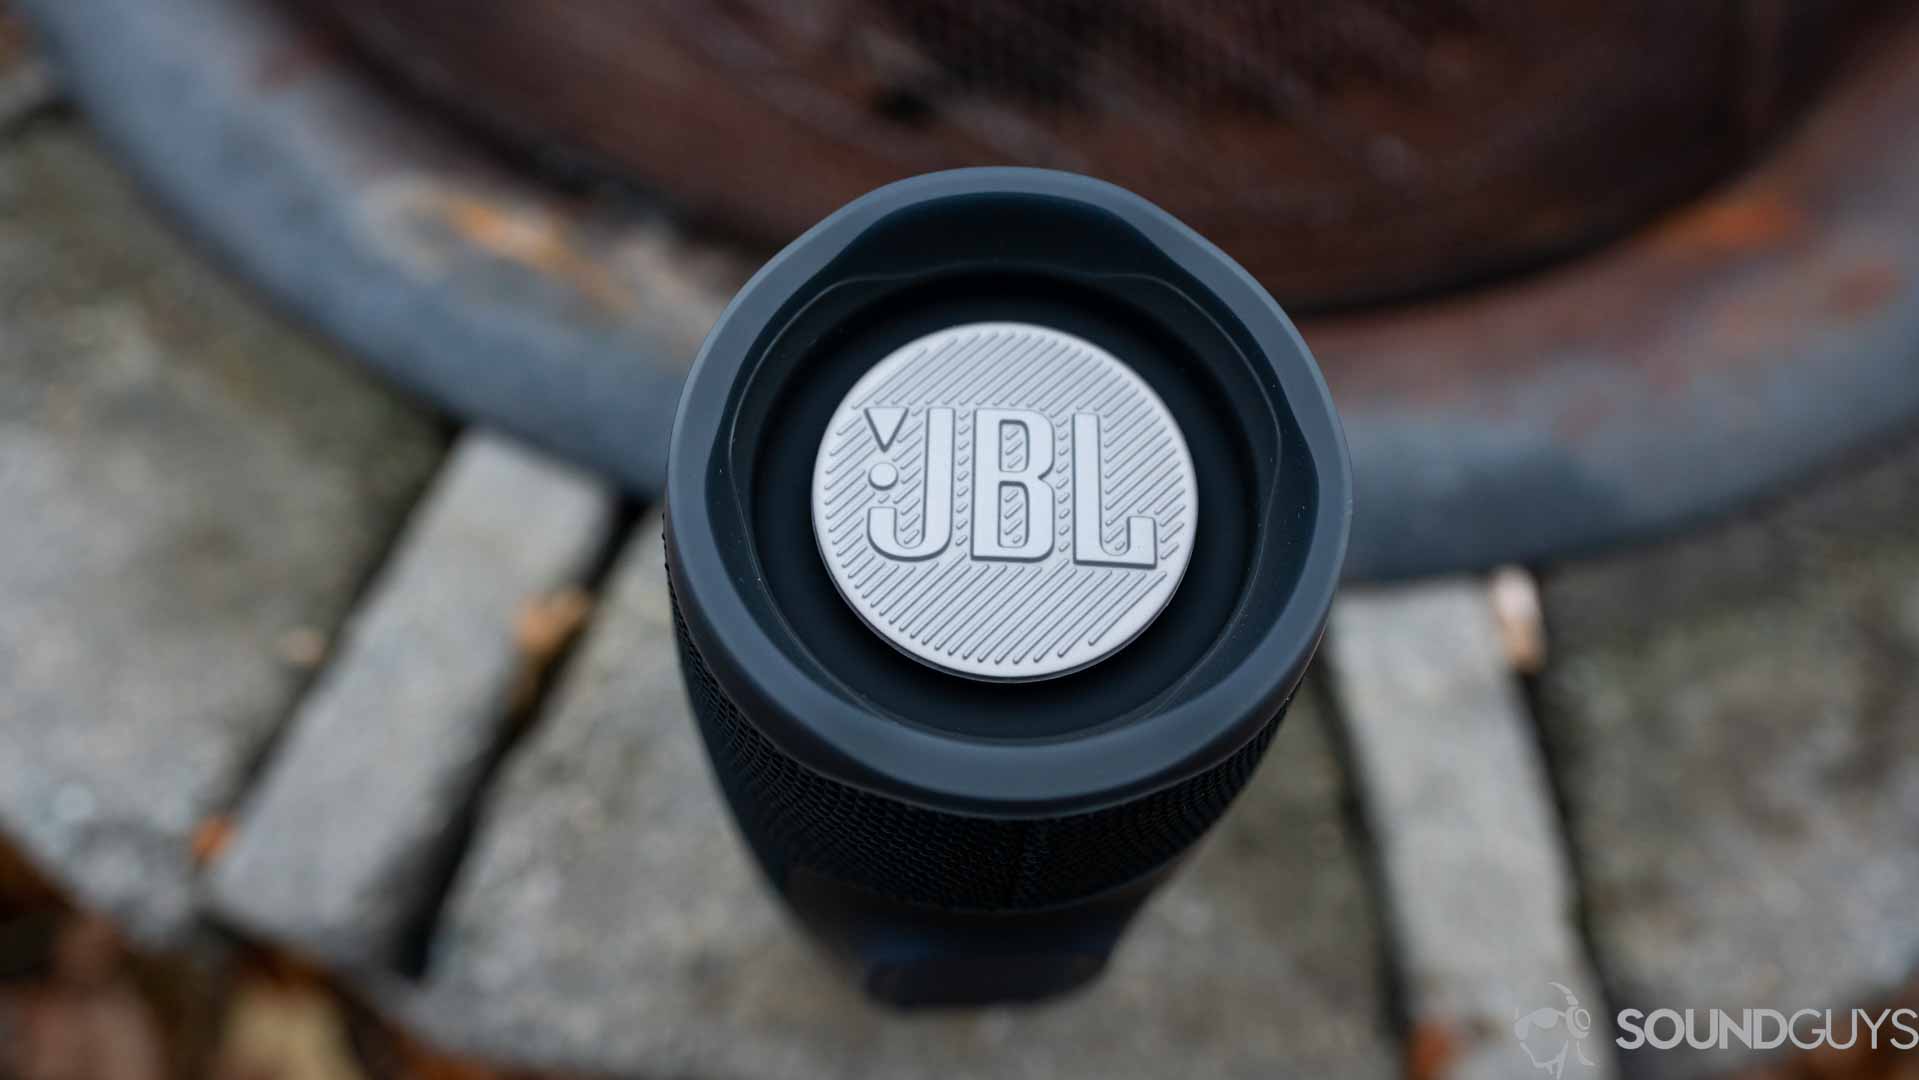 Pictured is the exposed passive radiator of our review unit JBL Charge 4.